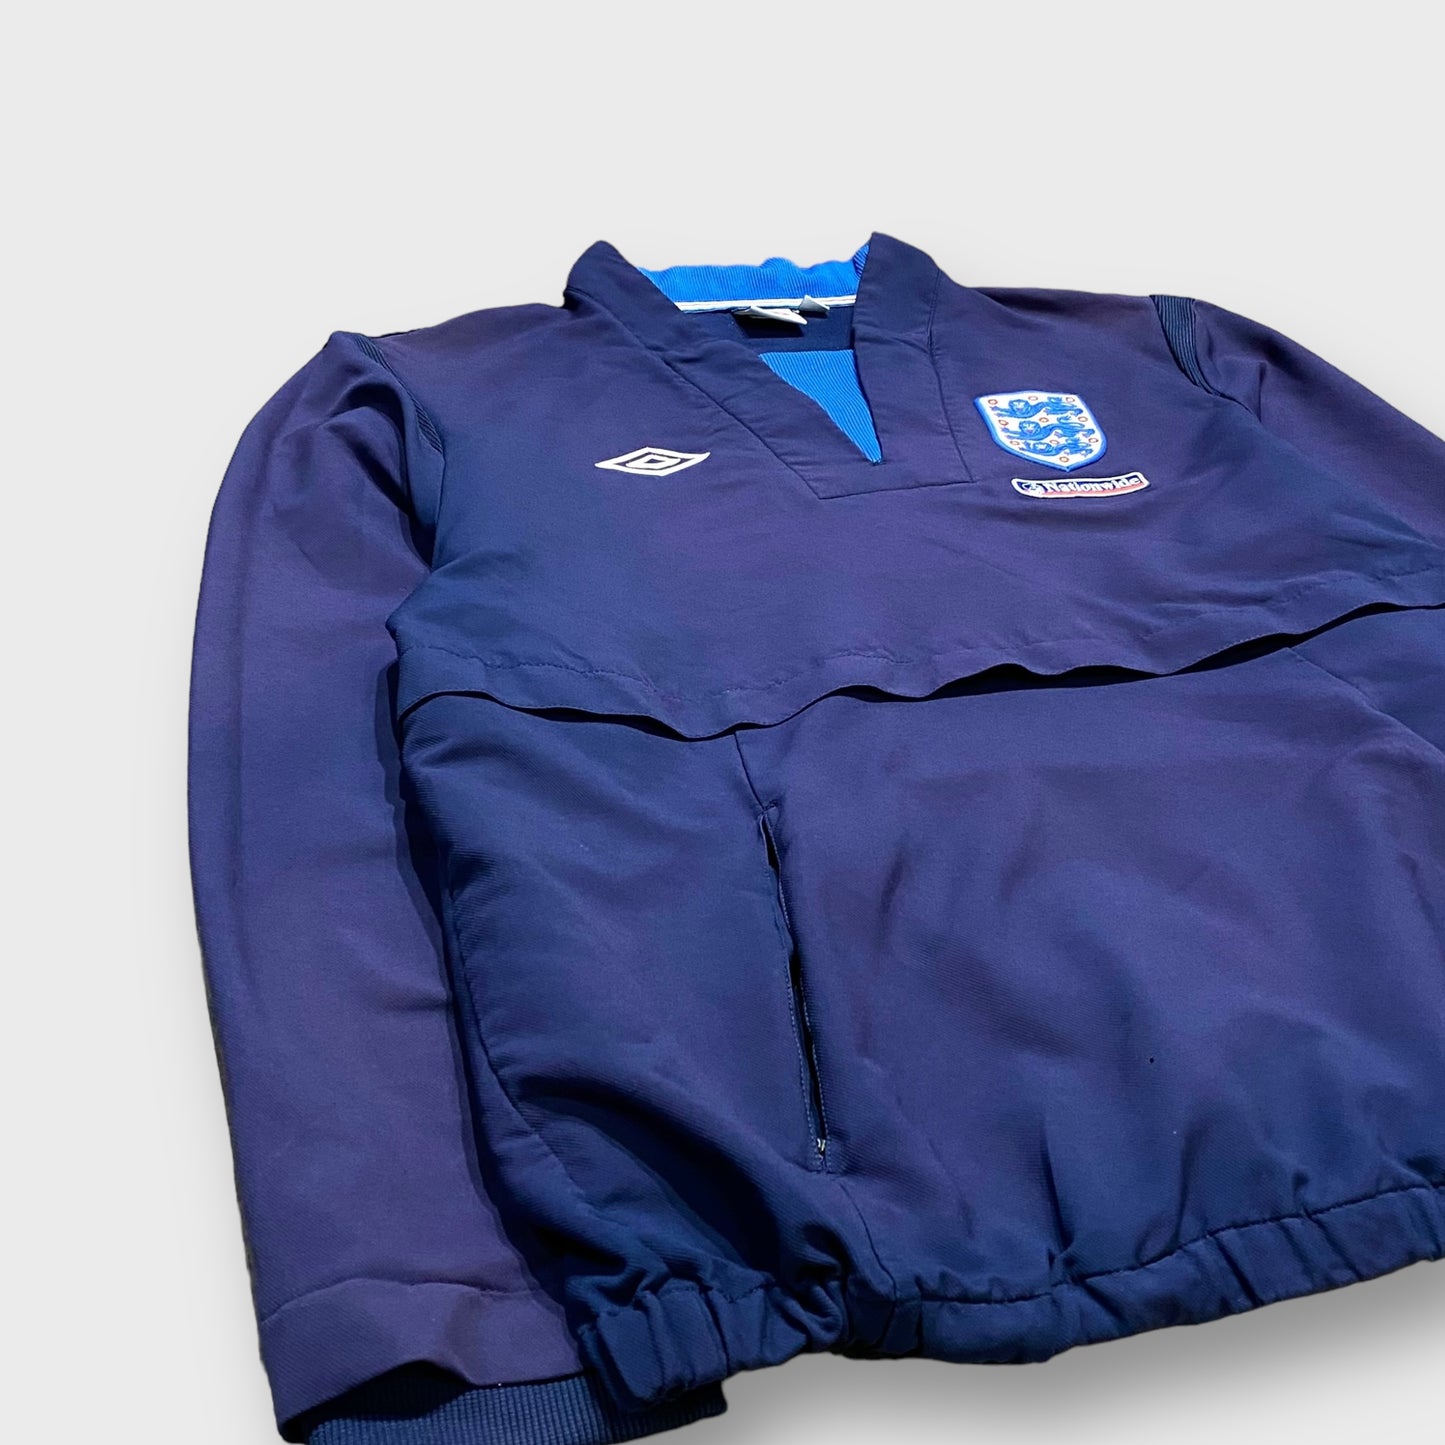 00's "umbro" England national team pullover